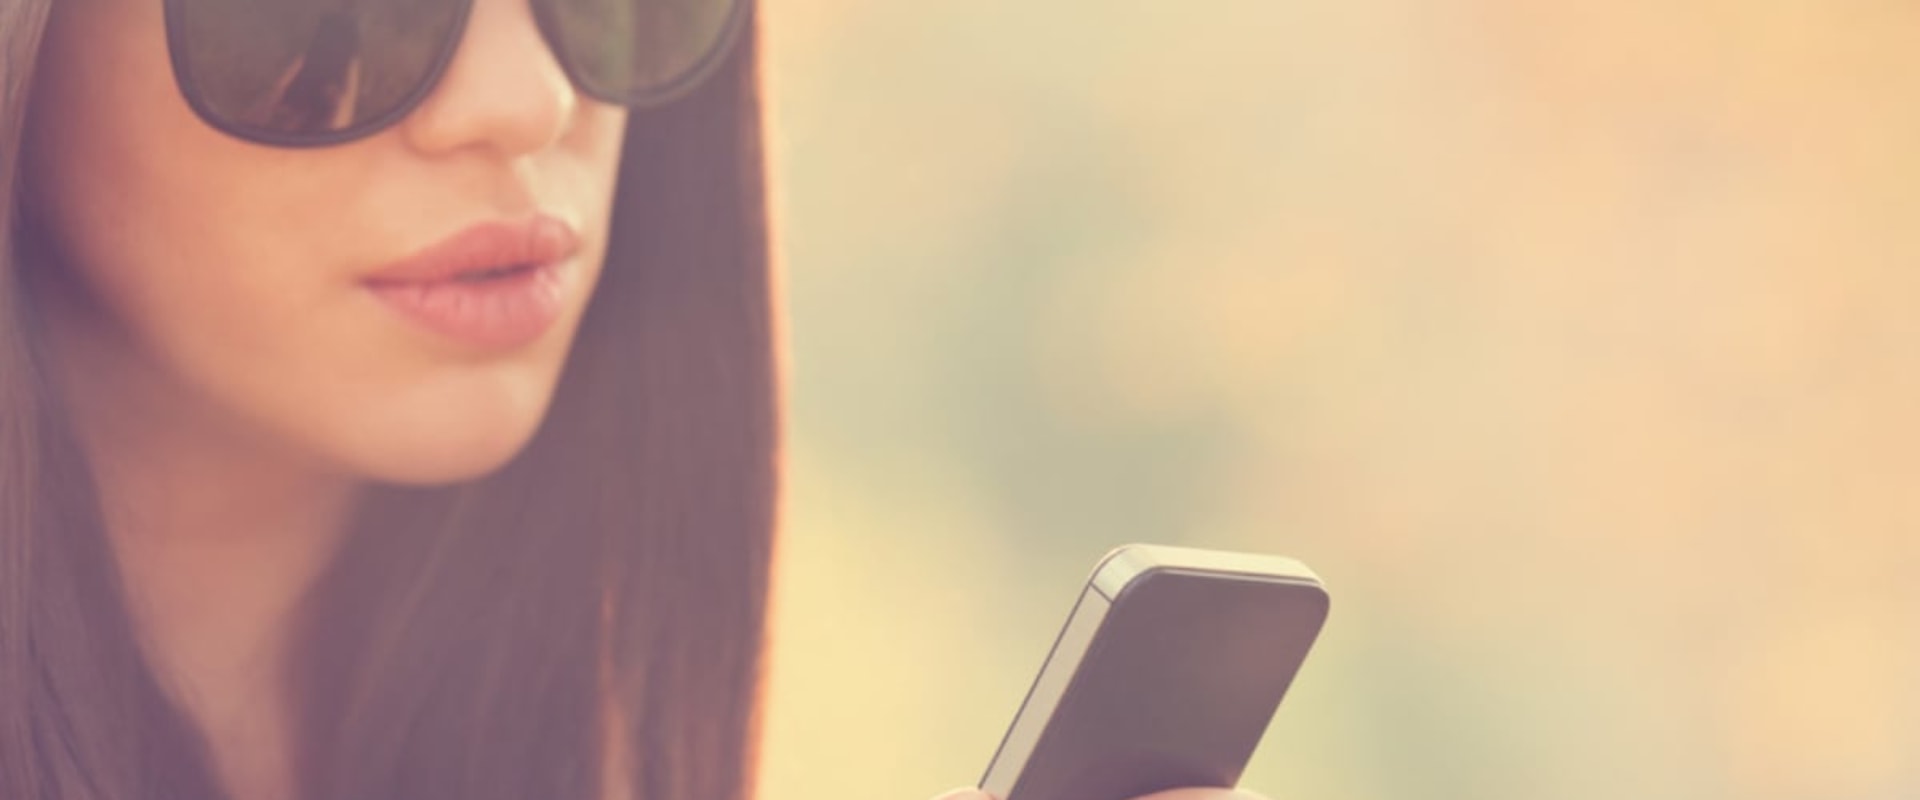 What are the best practices for creating effective mobile ads for digital campaigns?